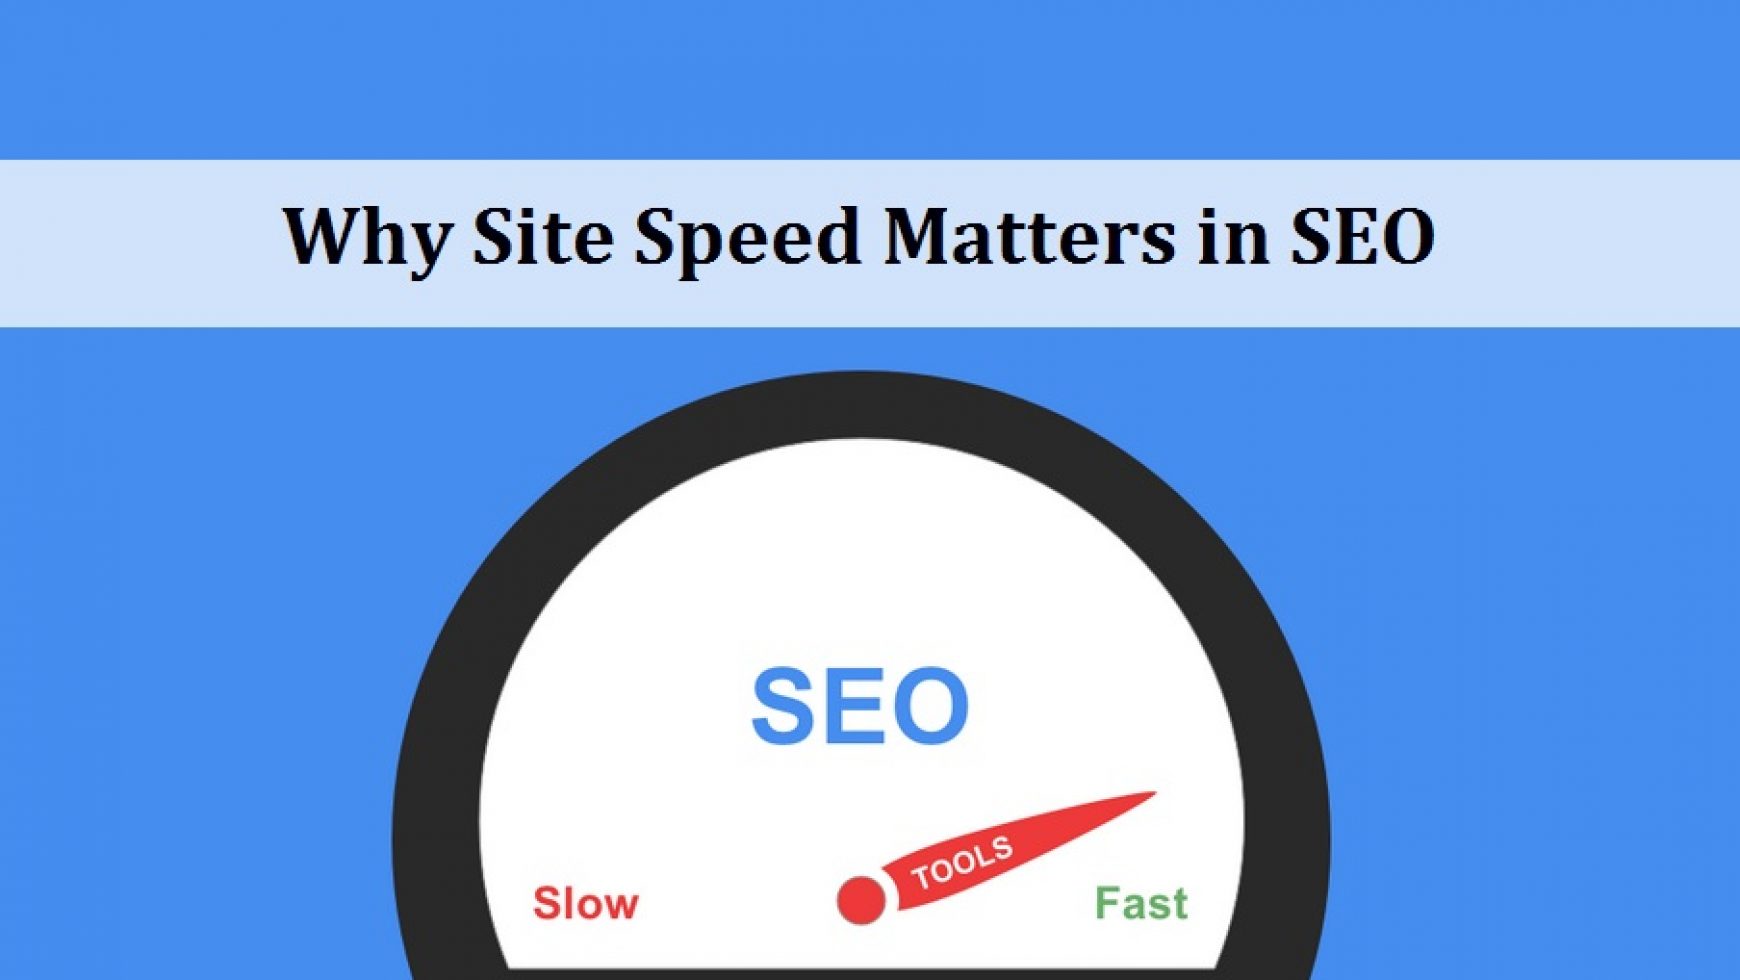 Why Site Speed Matters in SEO